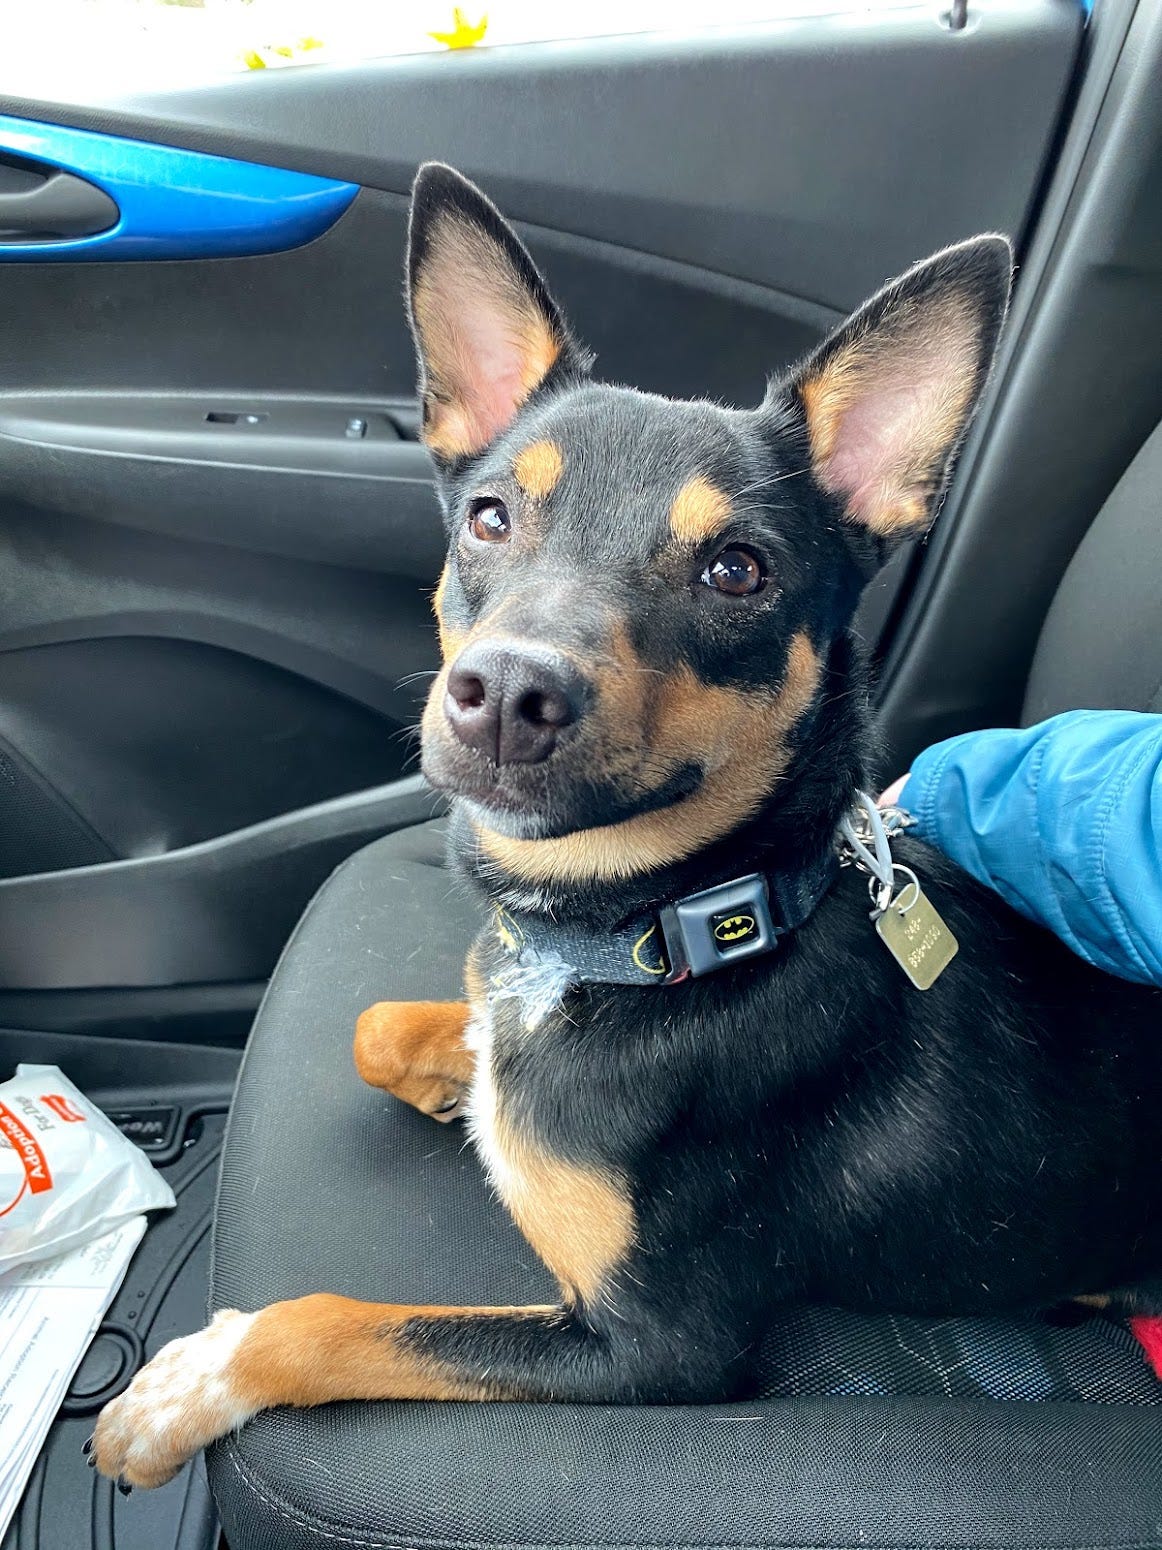 A tri-color dog with prick ears looking at the camera while sitting in the passenger seat of a car.